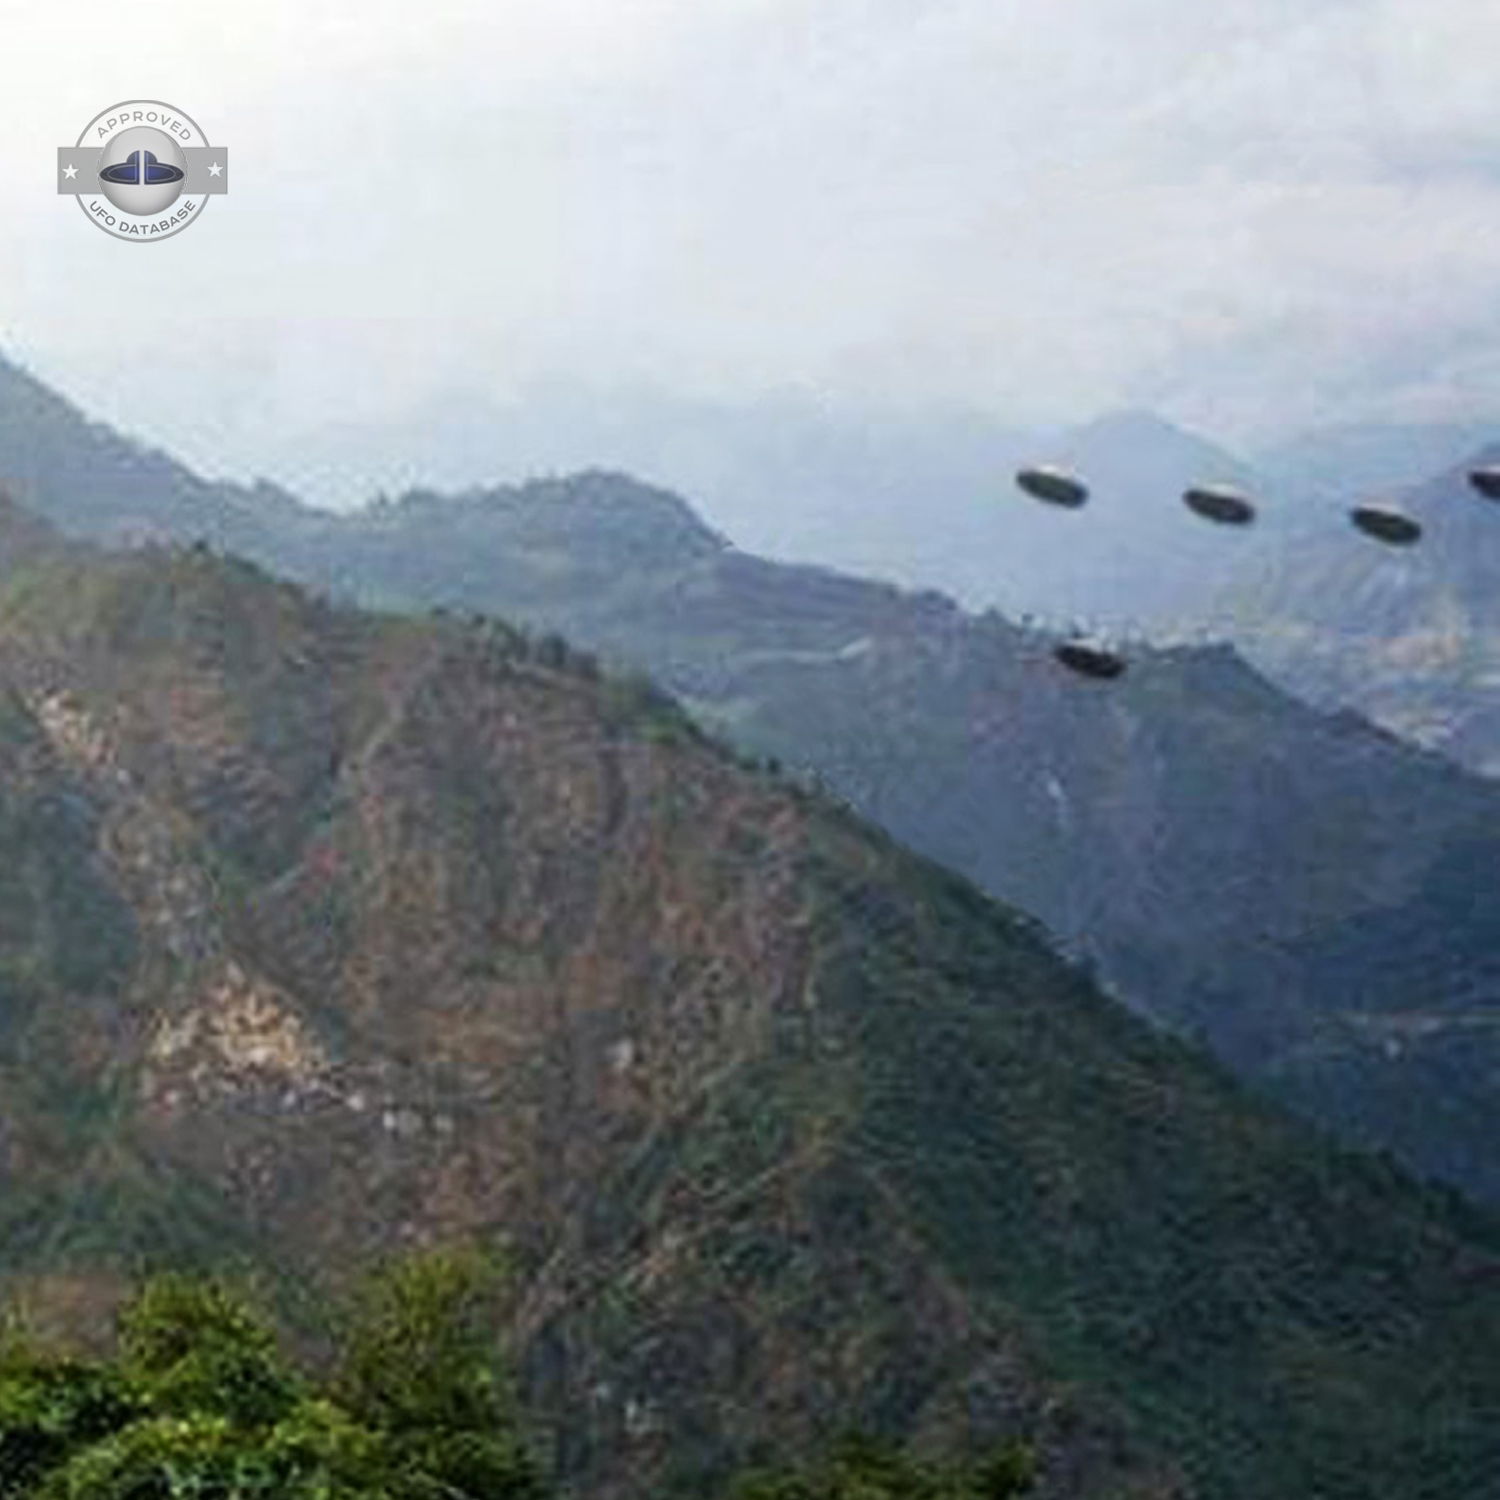 Fleet of 5 UFOs flying in precise formation Hills of Sombaria Gangtok UFO Picture #202-3